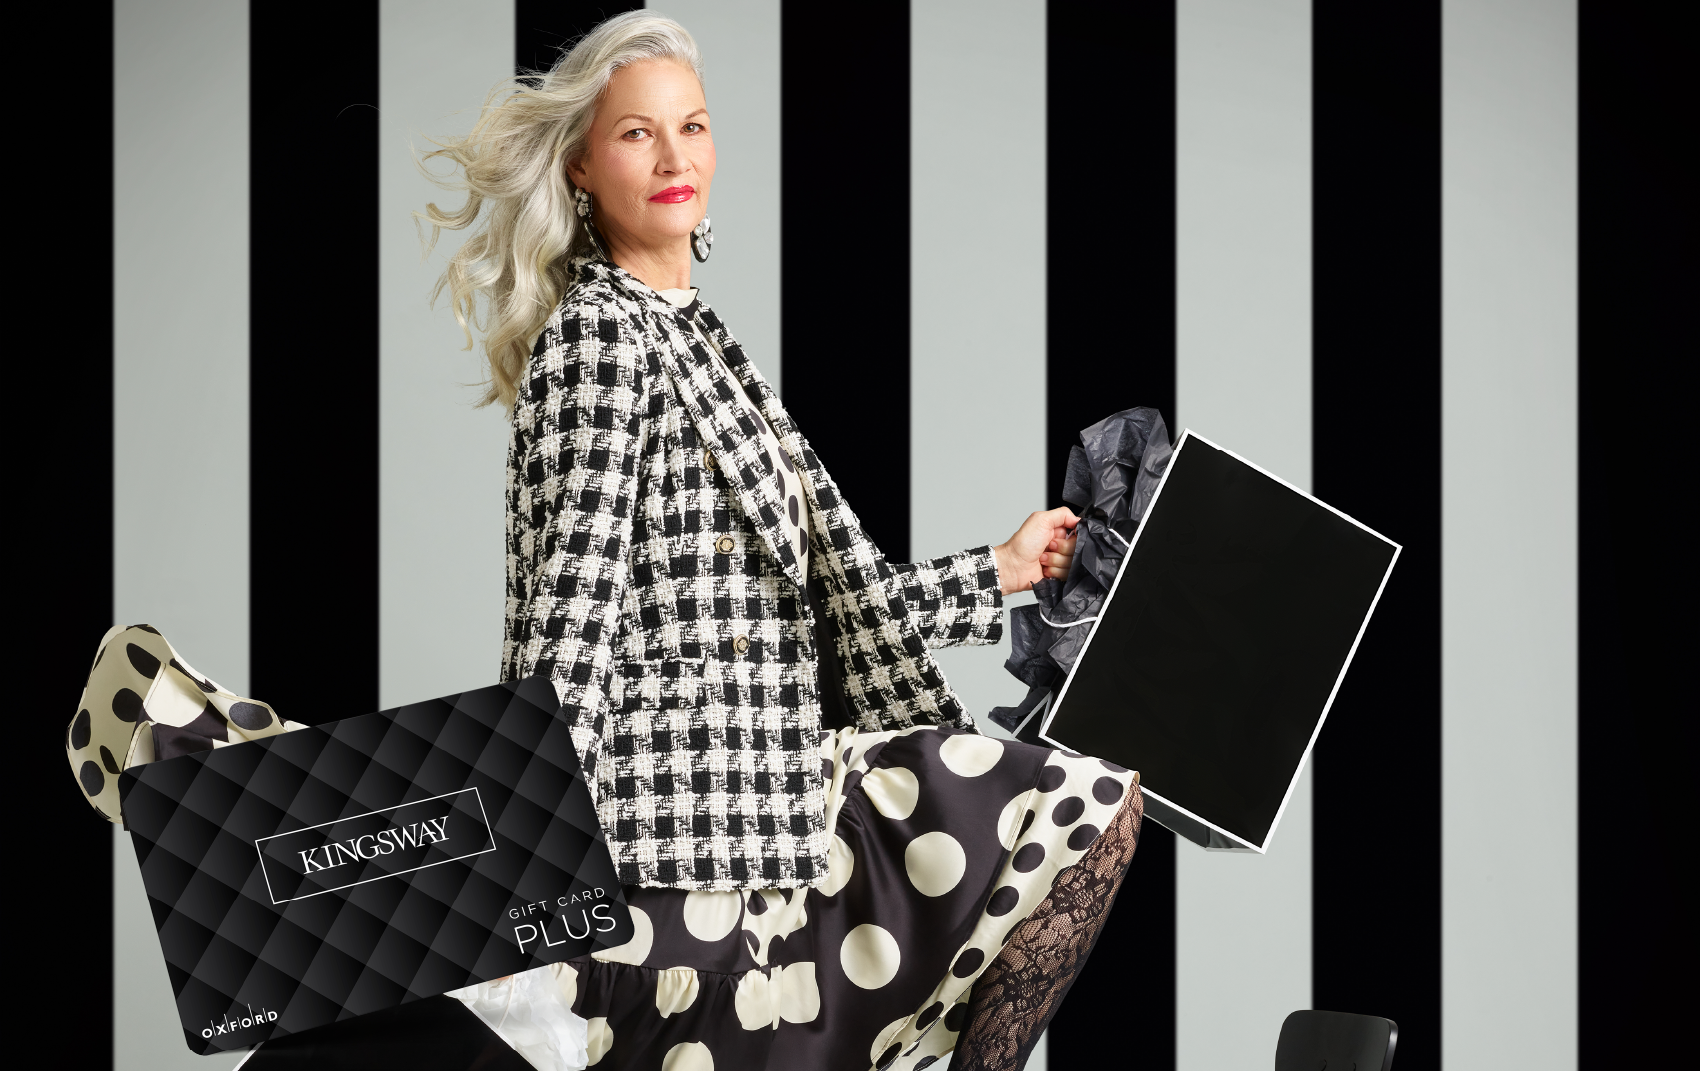 promotional image for a Kingsway gift card. It shows a woman wearing a black and white houndstooth blazer and black and white polka dot skirt holding black and white shopping bags. A Kingsway gift card is also in the image